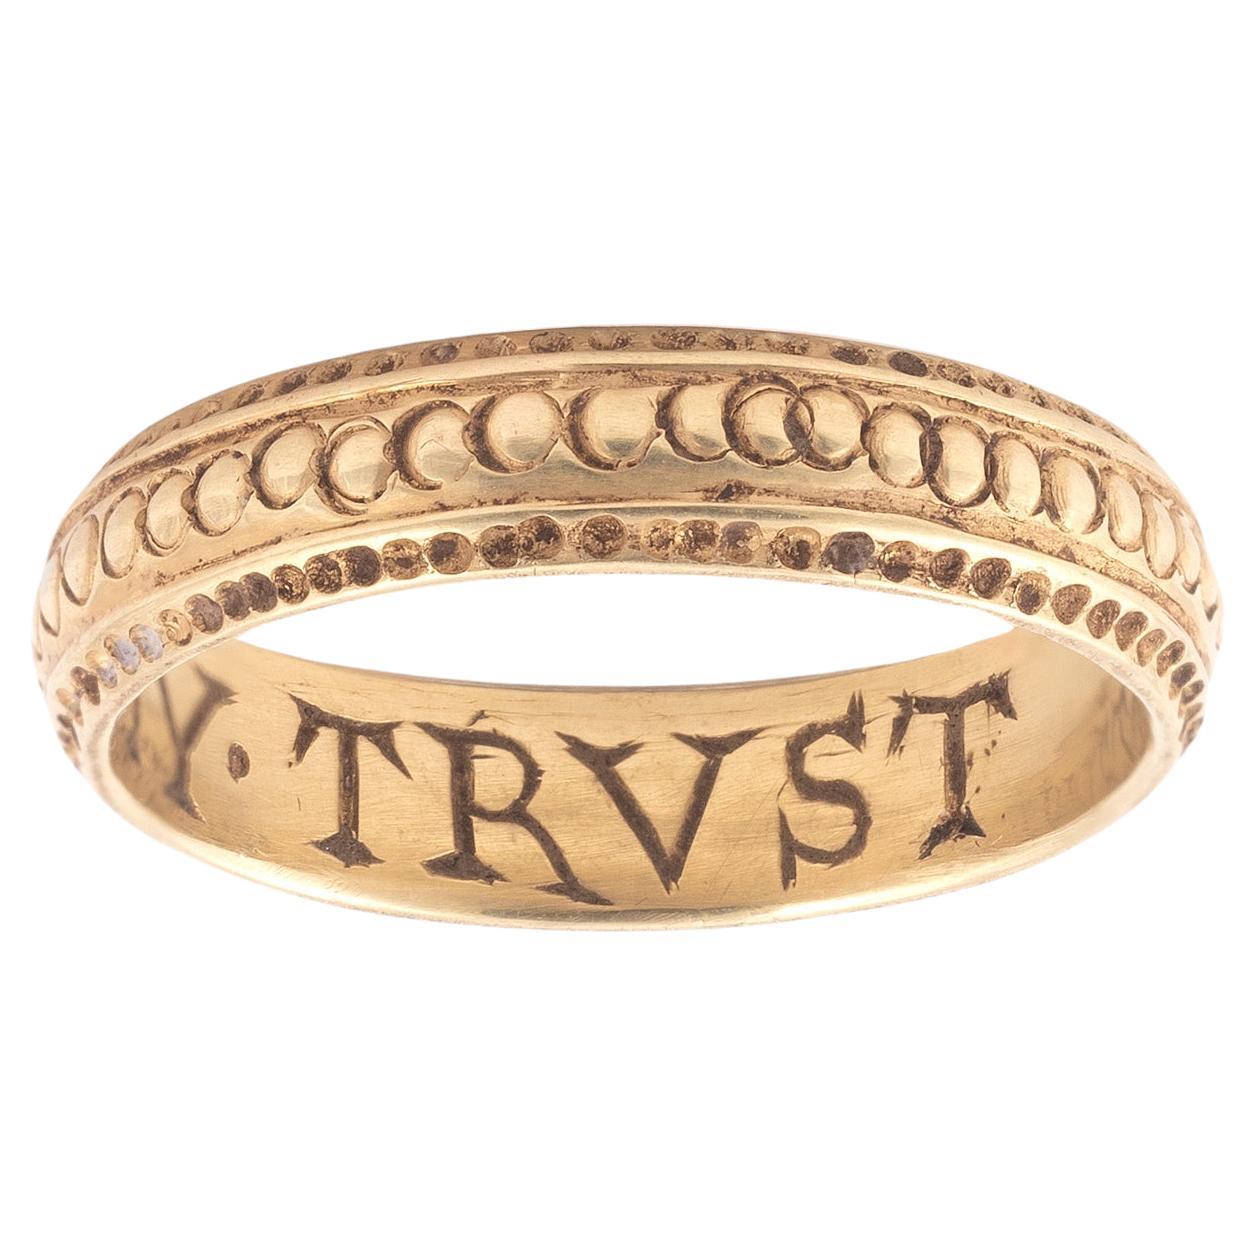 Late 17th century gold posy ring, engraved to the interior with the inscription 'Alle my trust' with engraved decoration to outer shank, size 7
Weight: 4,11gr.

“Posy rings,” their name deriving from the term poésie or poetry, are rings with mottoes